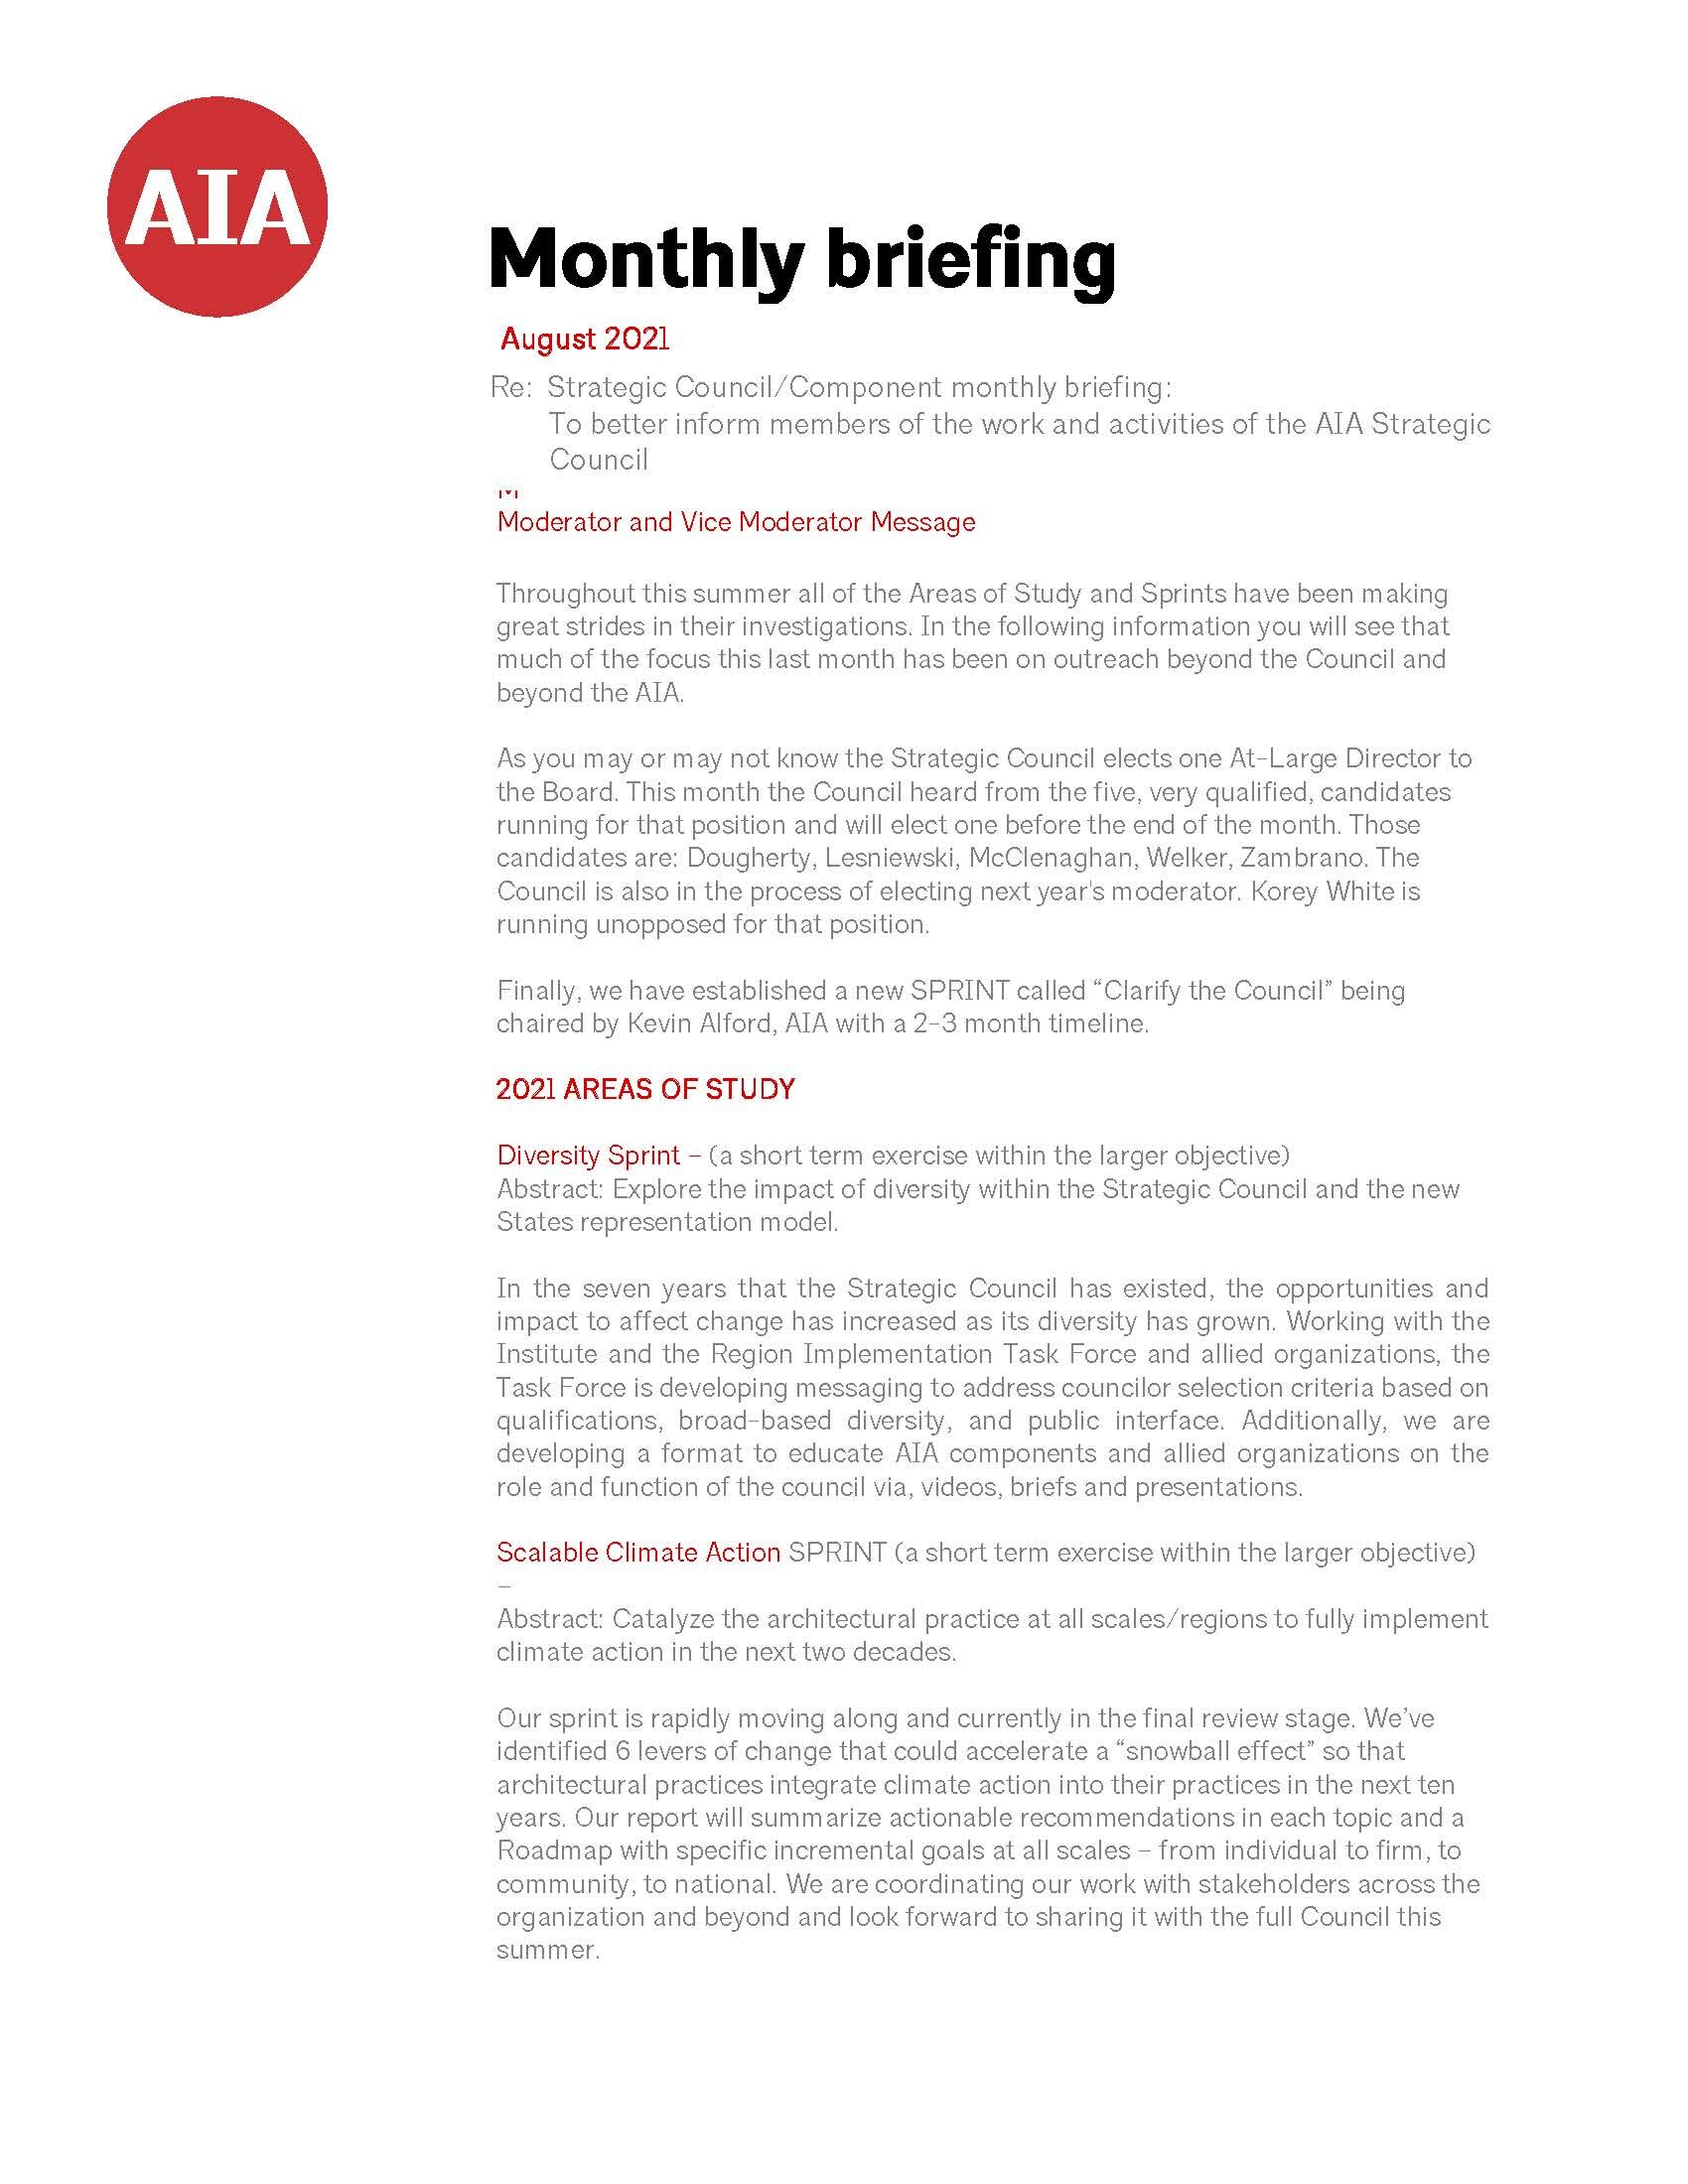 SC Monthly Briefing_July 2021 8-9-21 final_Page_1.jpg